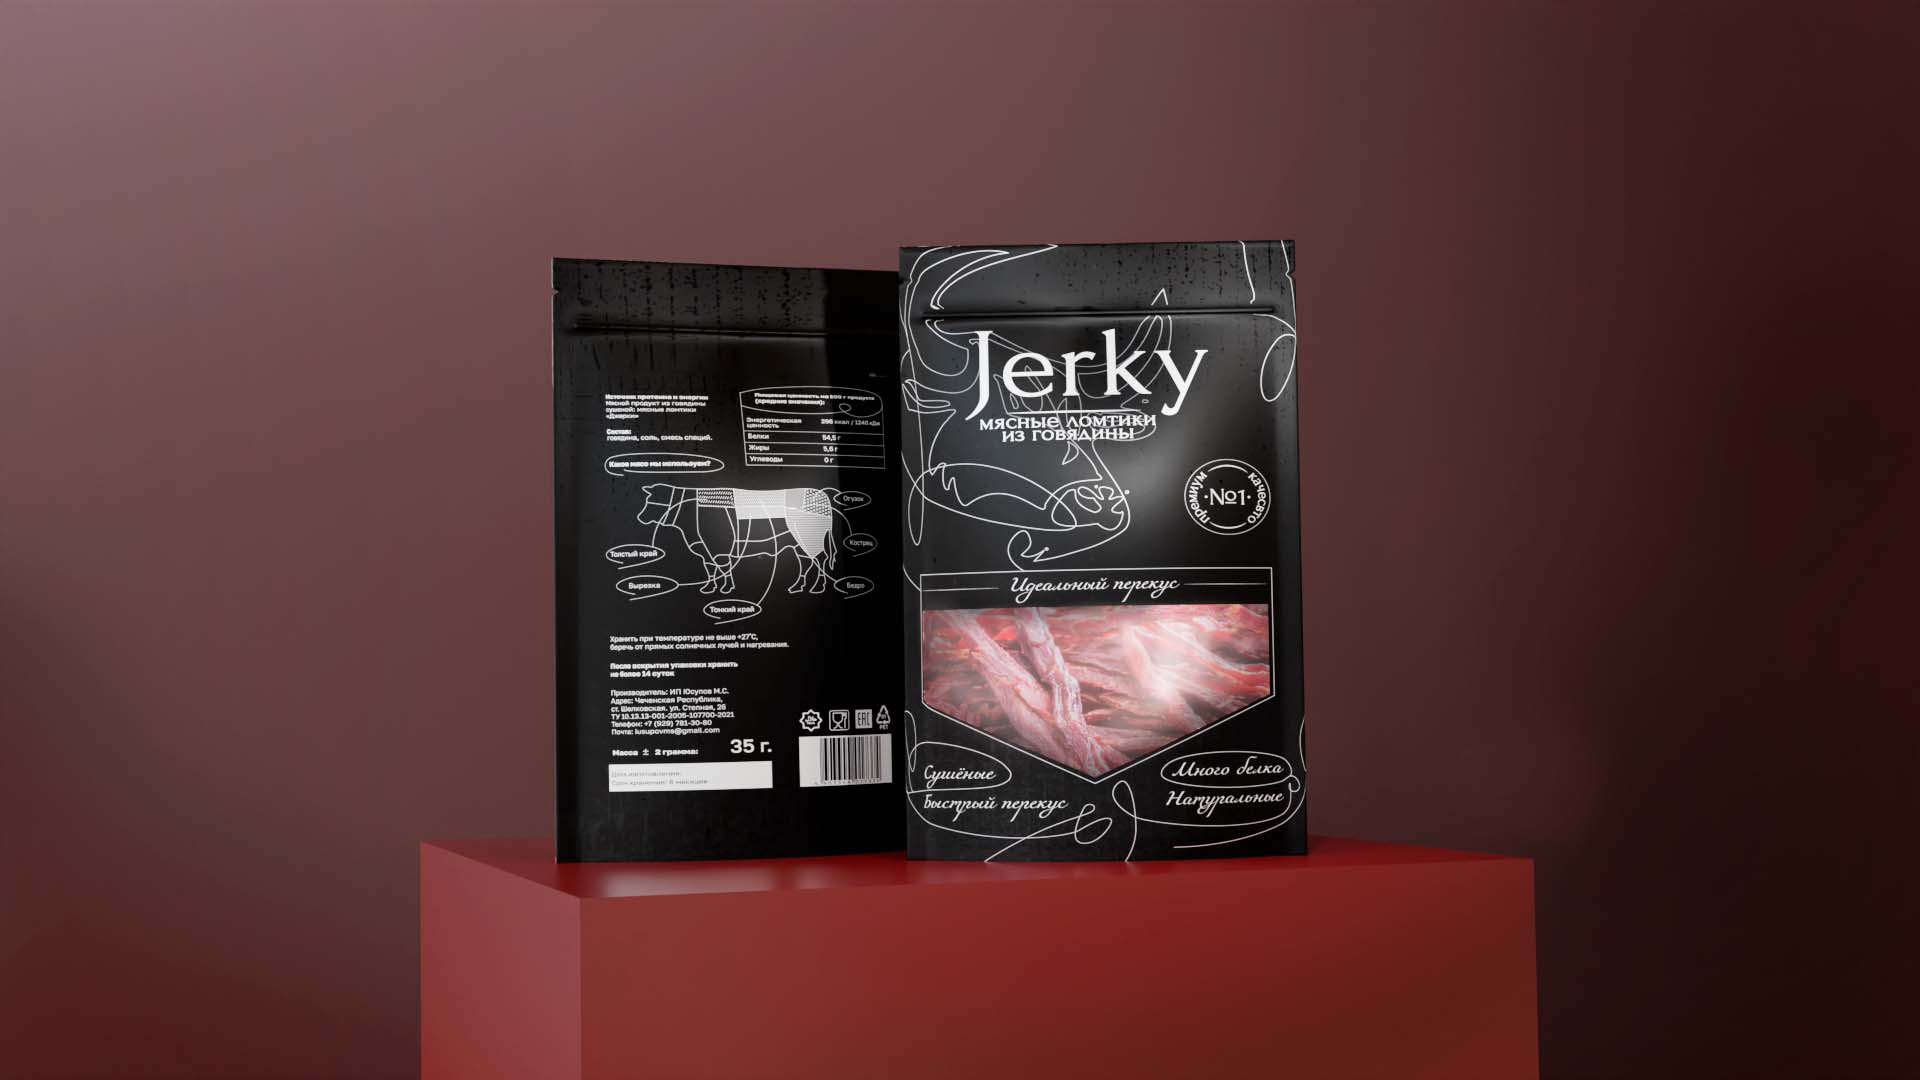 Jerky Packaging Design by BWDS Studio